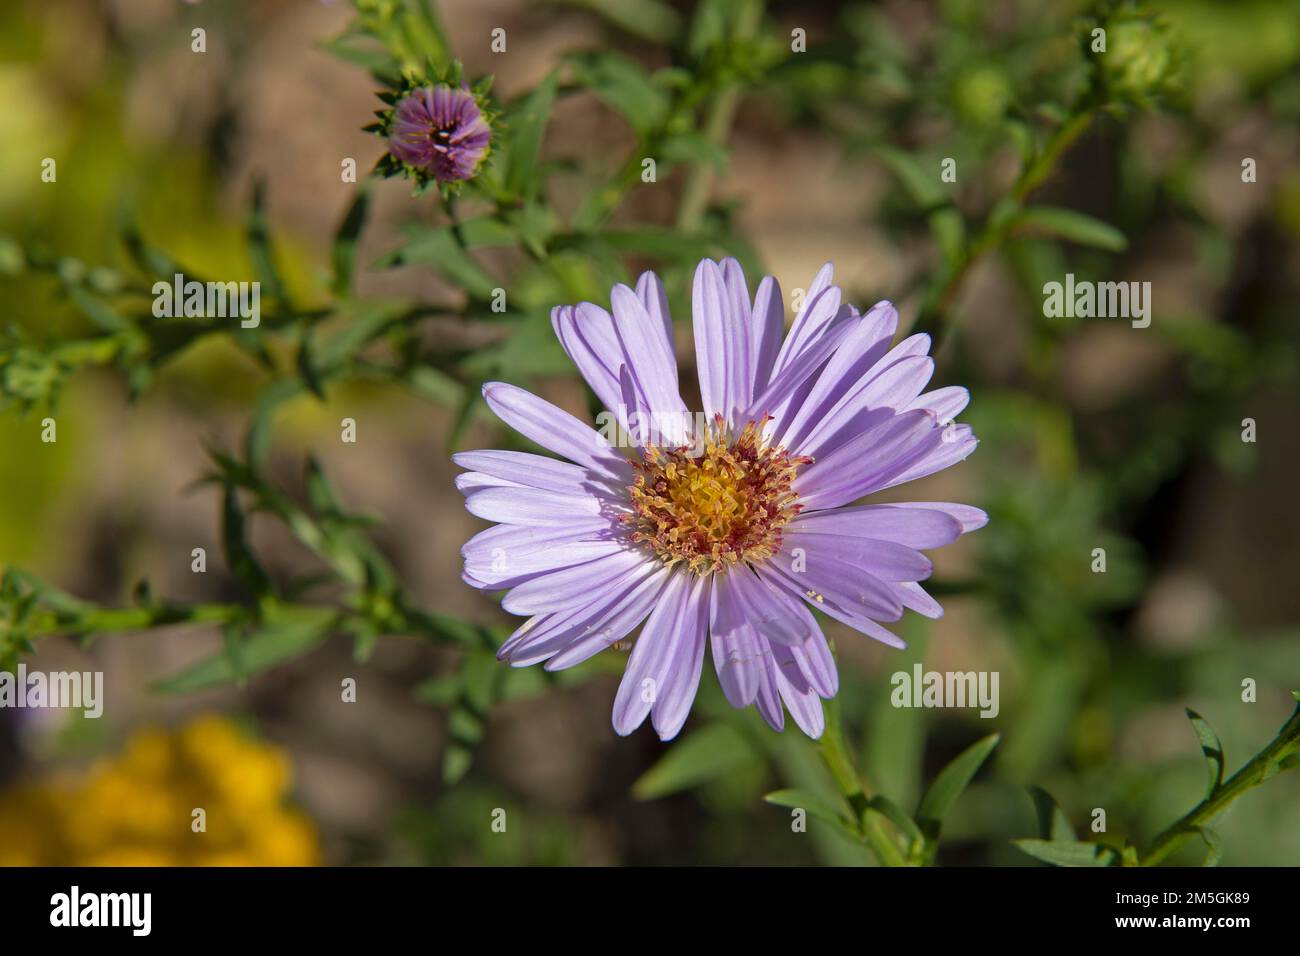 Cushion aster (Aster dumosus), Lower Saxony, Germany Stock Photo